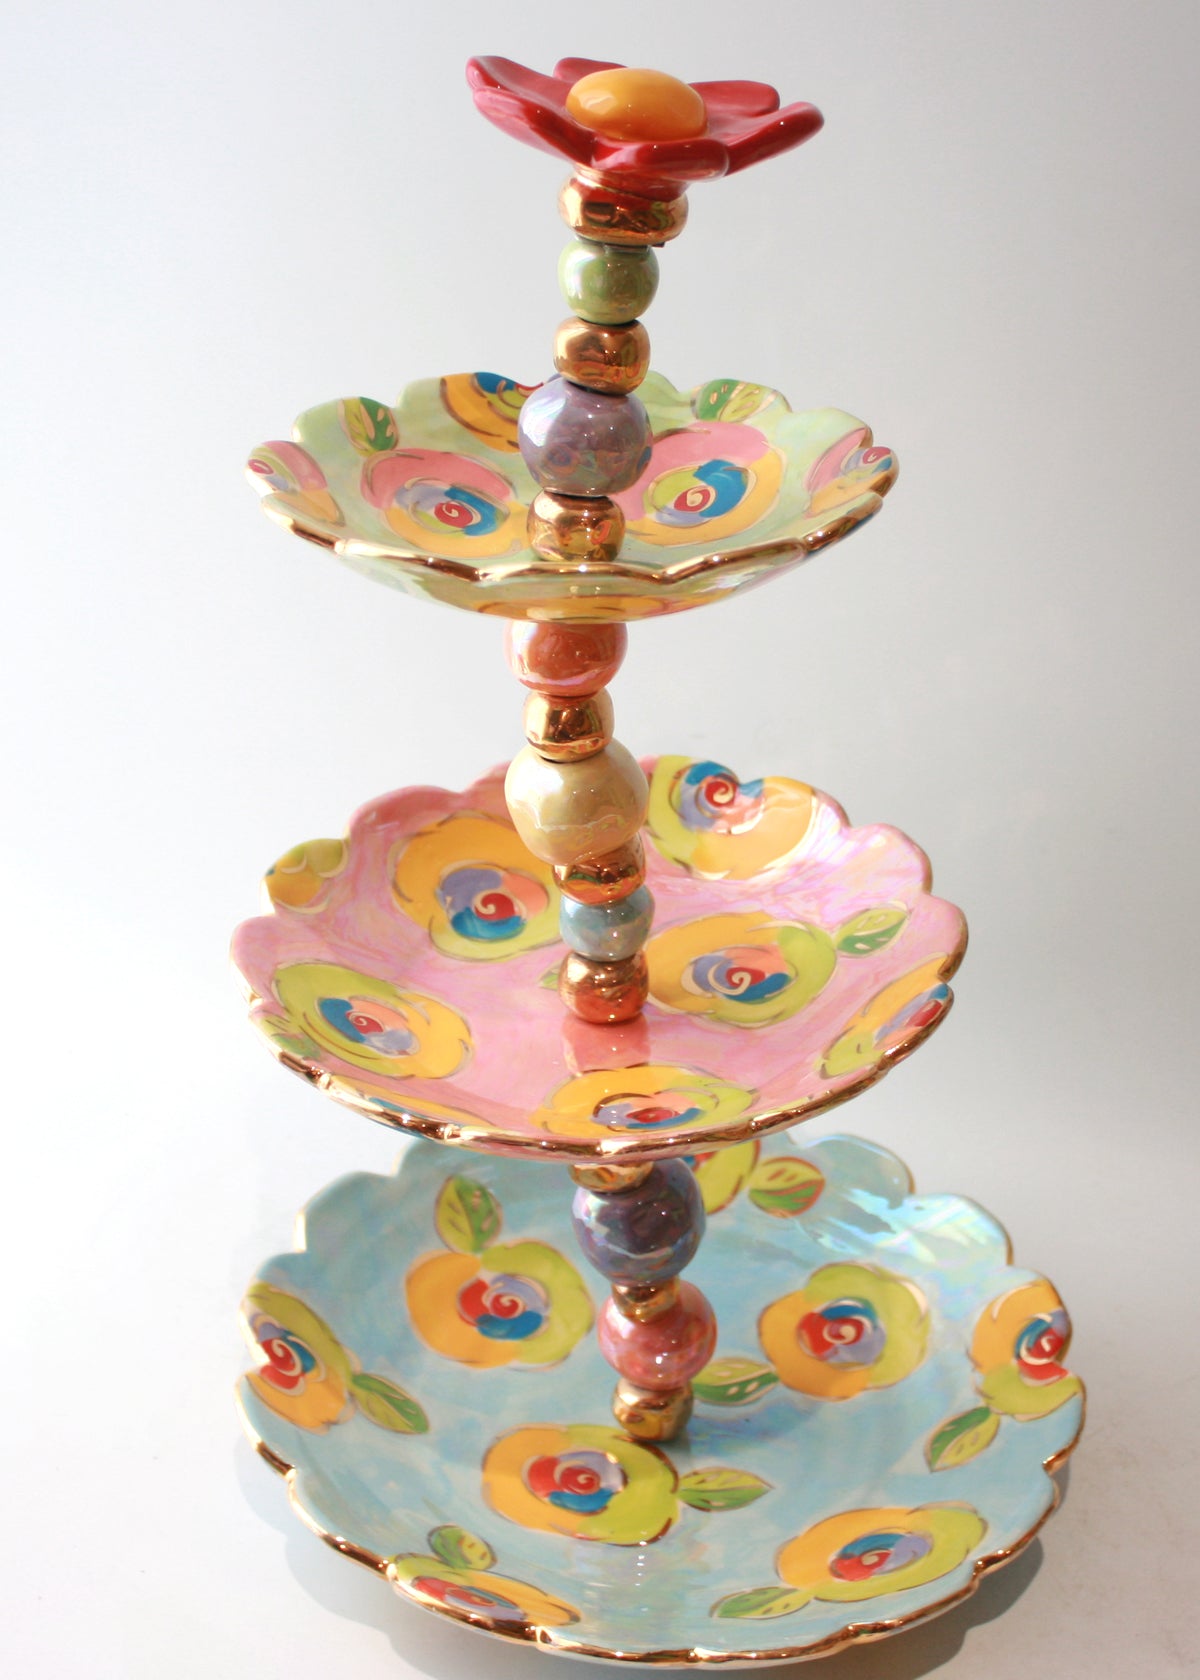 Three Tiered Wonky Cakestand in Iridescent Pastels